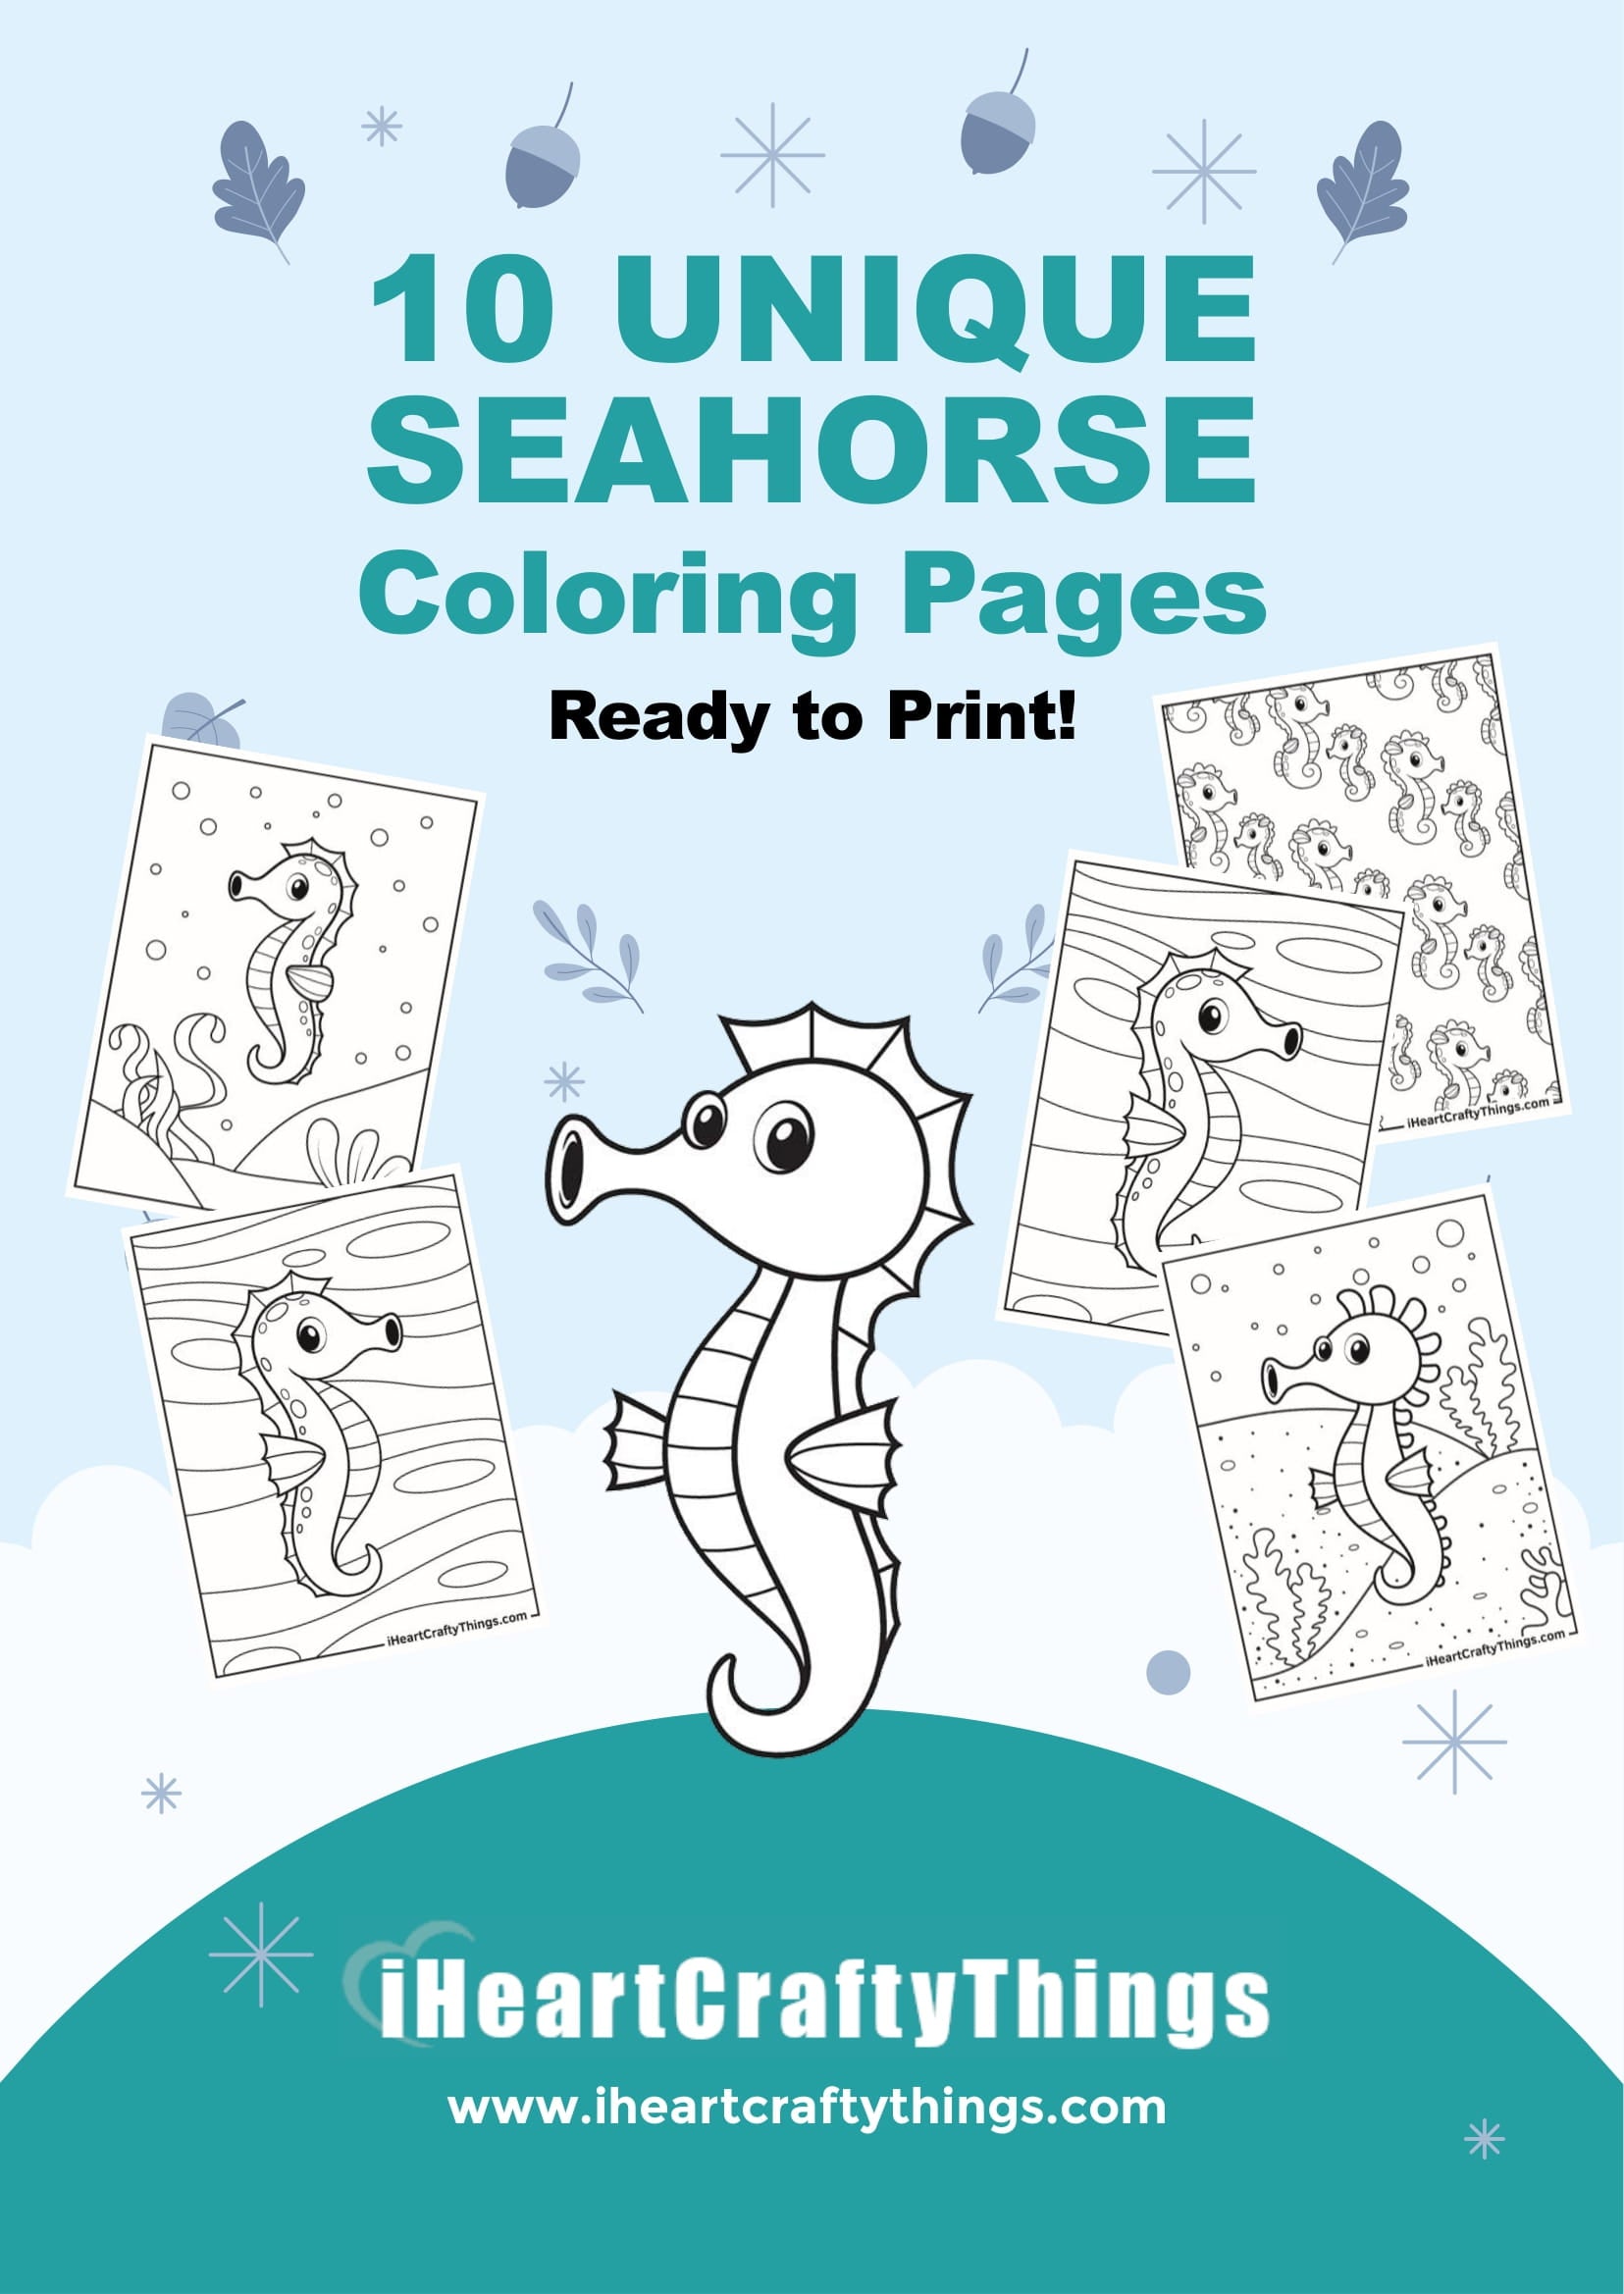 Sea horse coloring pages â i heart crafty things